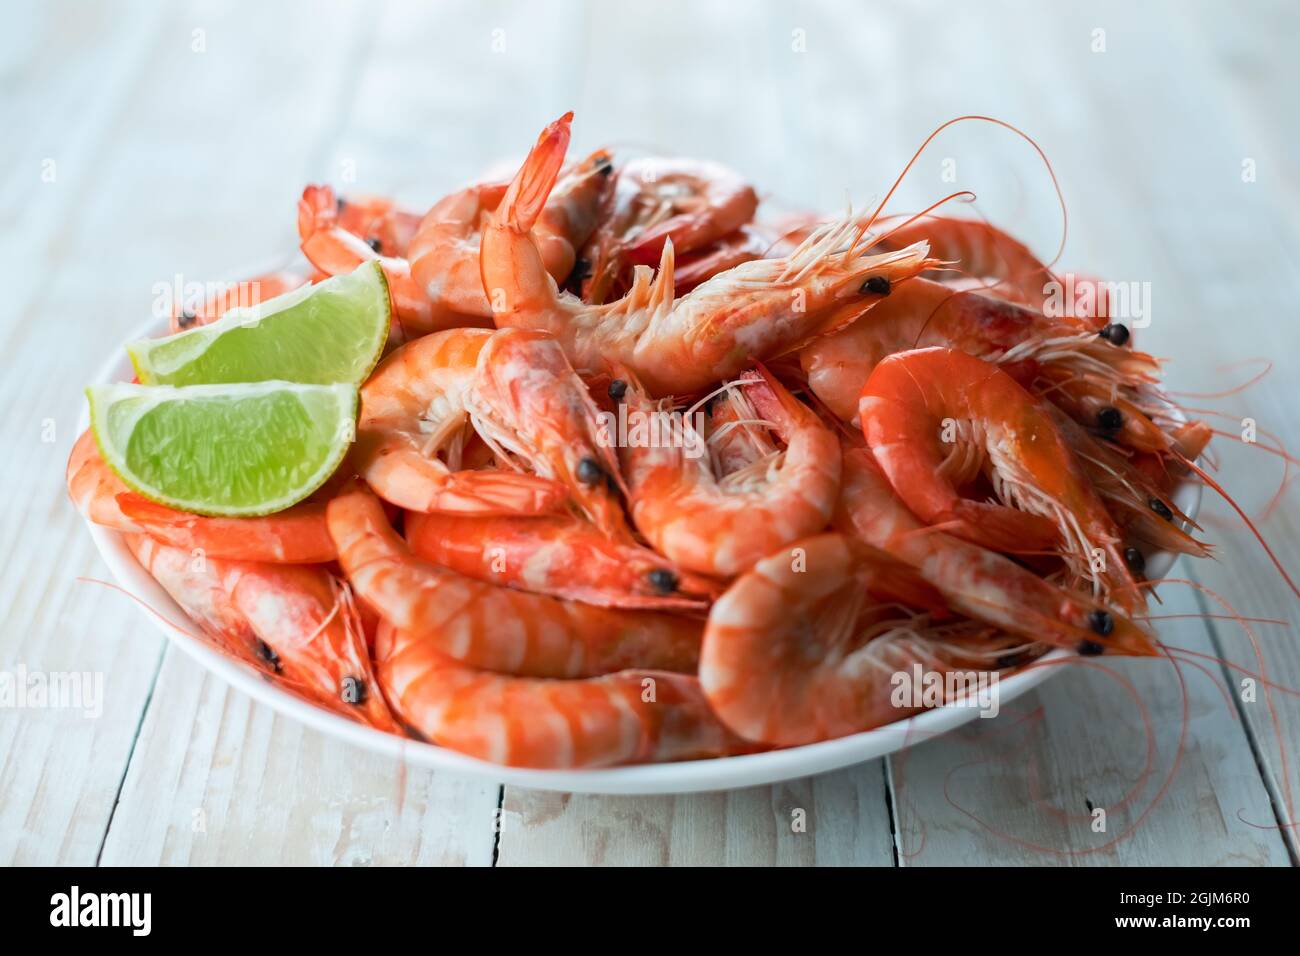 Big boiled shrimps in white plate close up. Seafood concept. Food photography Stock Photo